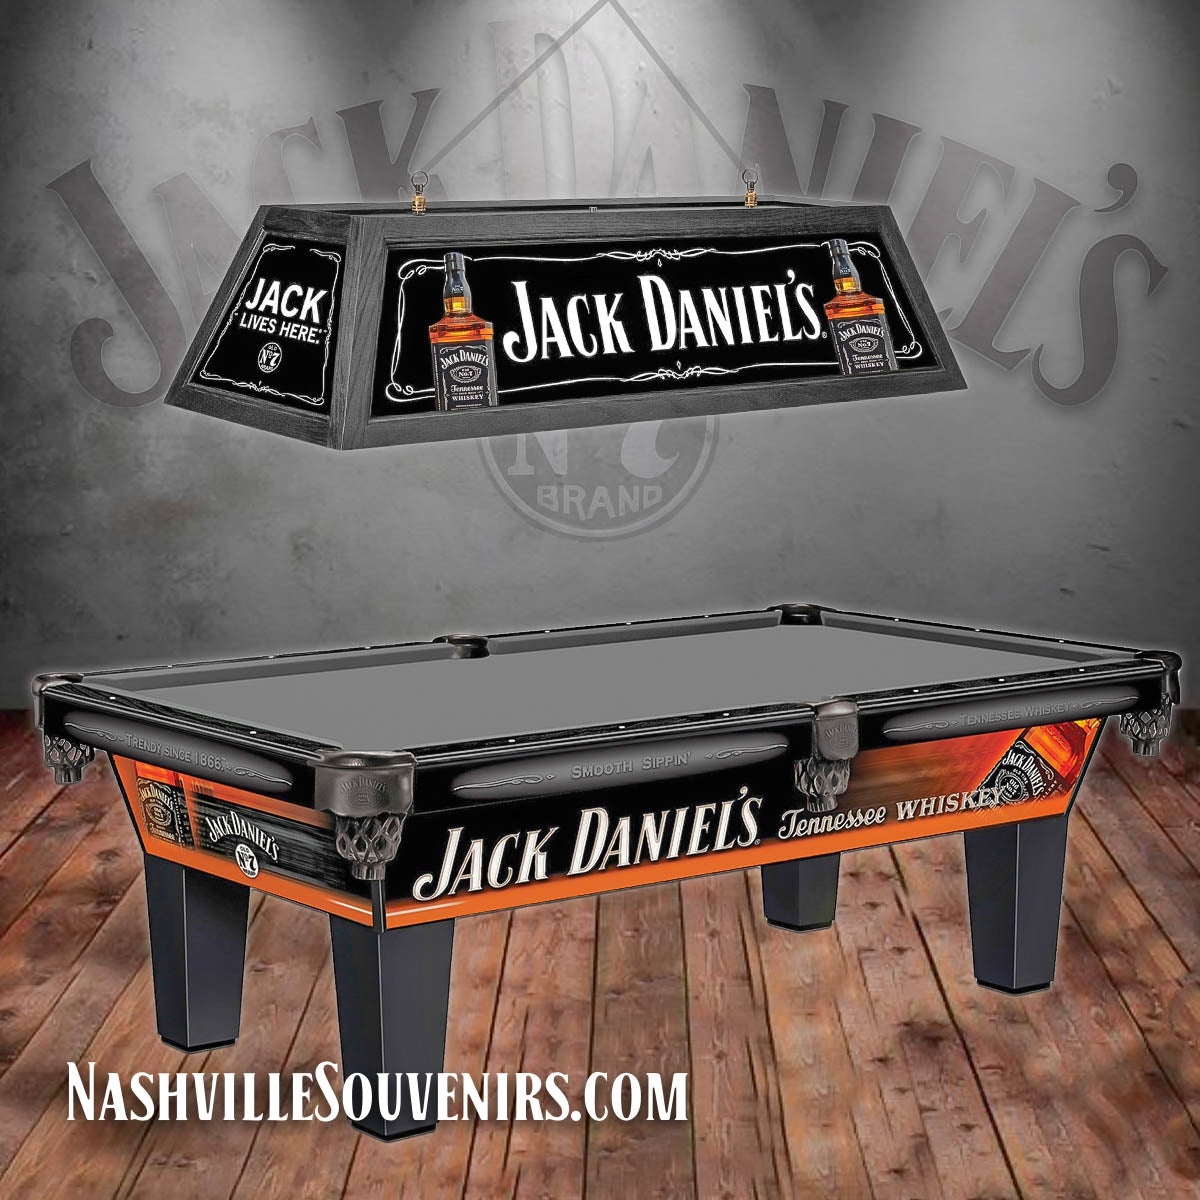 Custom Jack Daniel's pool table made by Olshausen and available from NashvilleSouvenirs.com